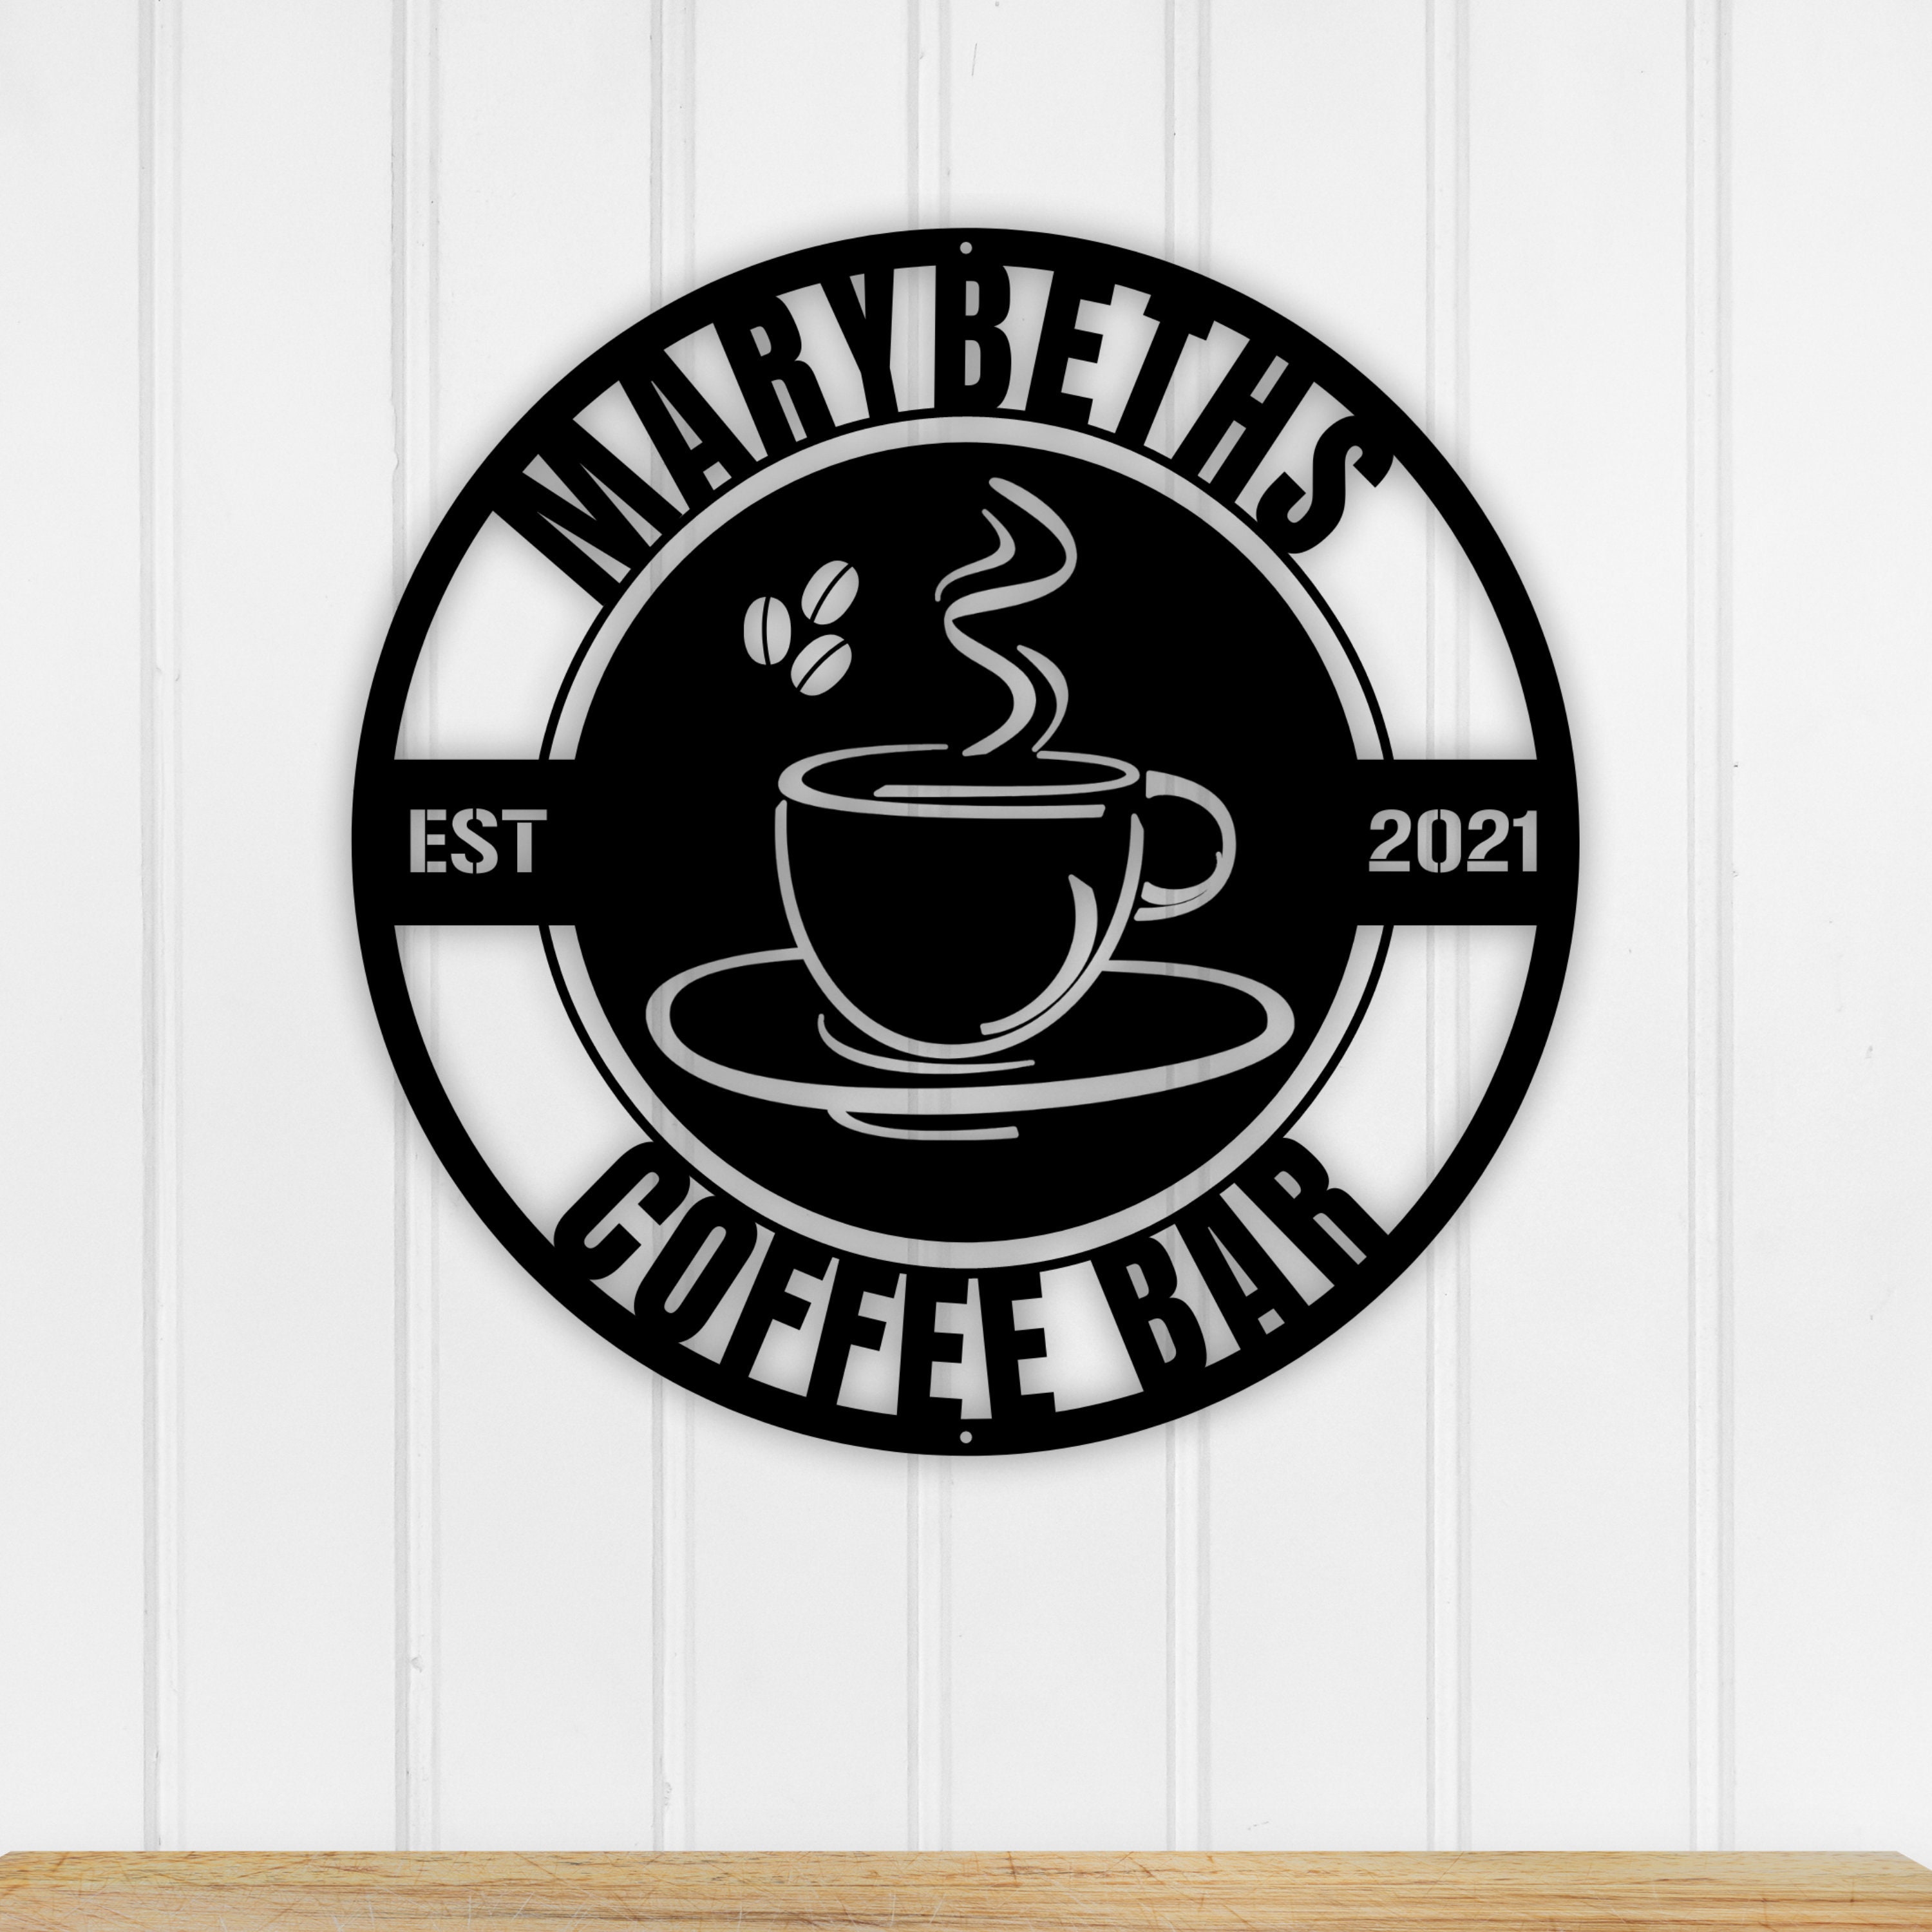 WODORO Custom Coffee Bar Vintage Wood Sign, Kitchen Decor Wall Art Plaque,  Personalized Gifts for Coffee Lovers, Espresso Cappuccino Latte Coffee 